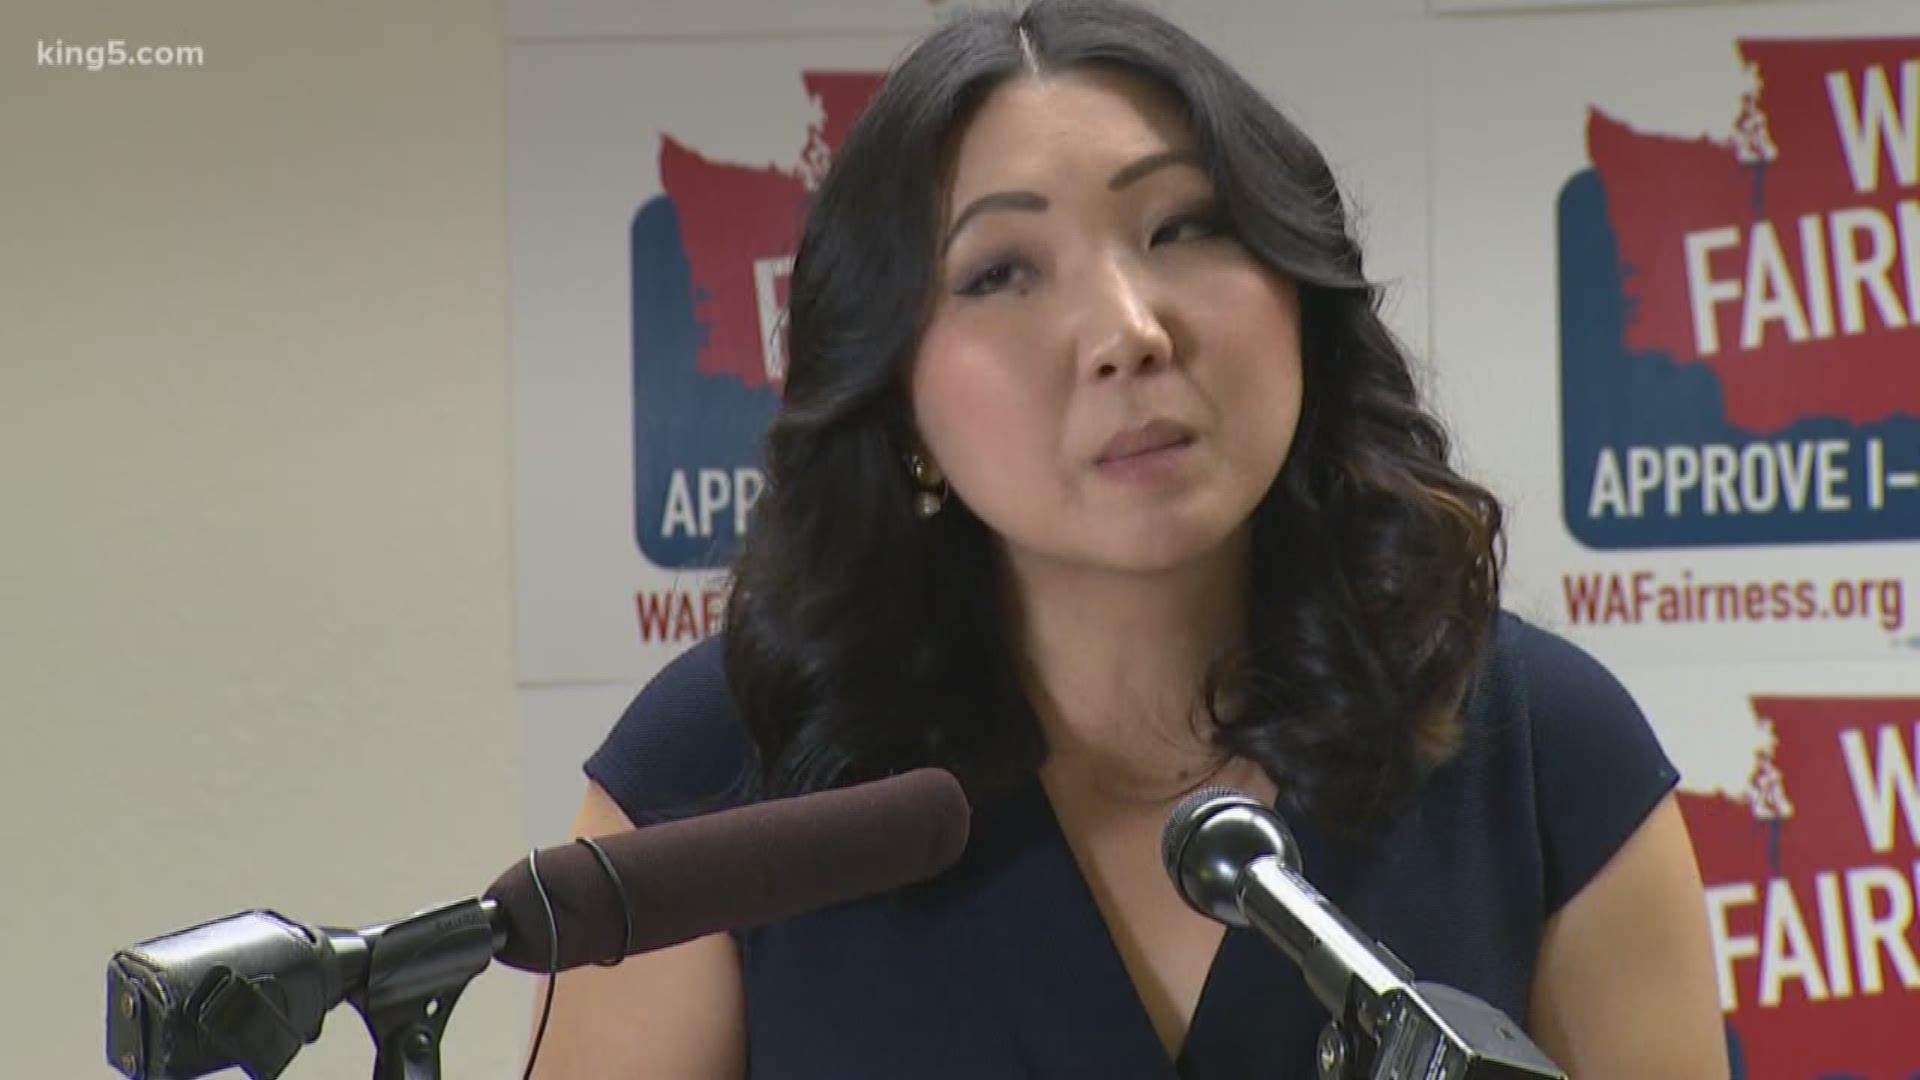 The group working to restore affirmative action in Washington state is beginning its push towards election day. KING 5’s Michael Crowe reports.